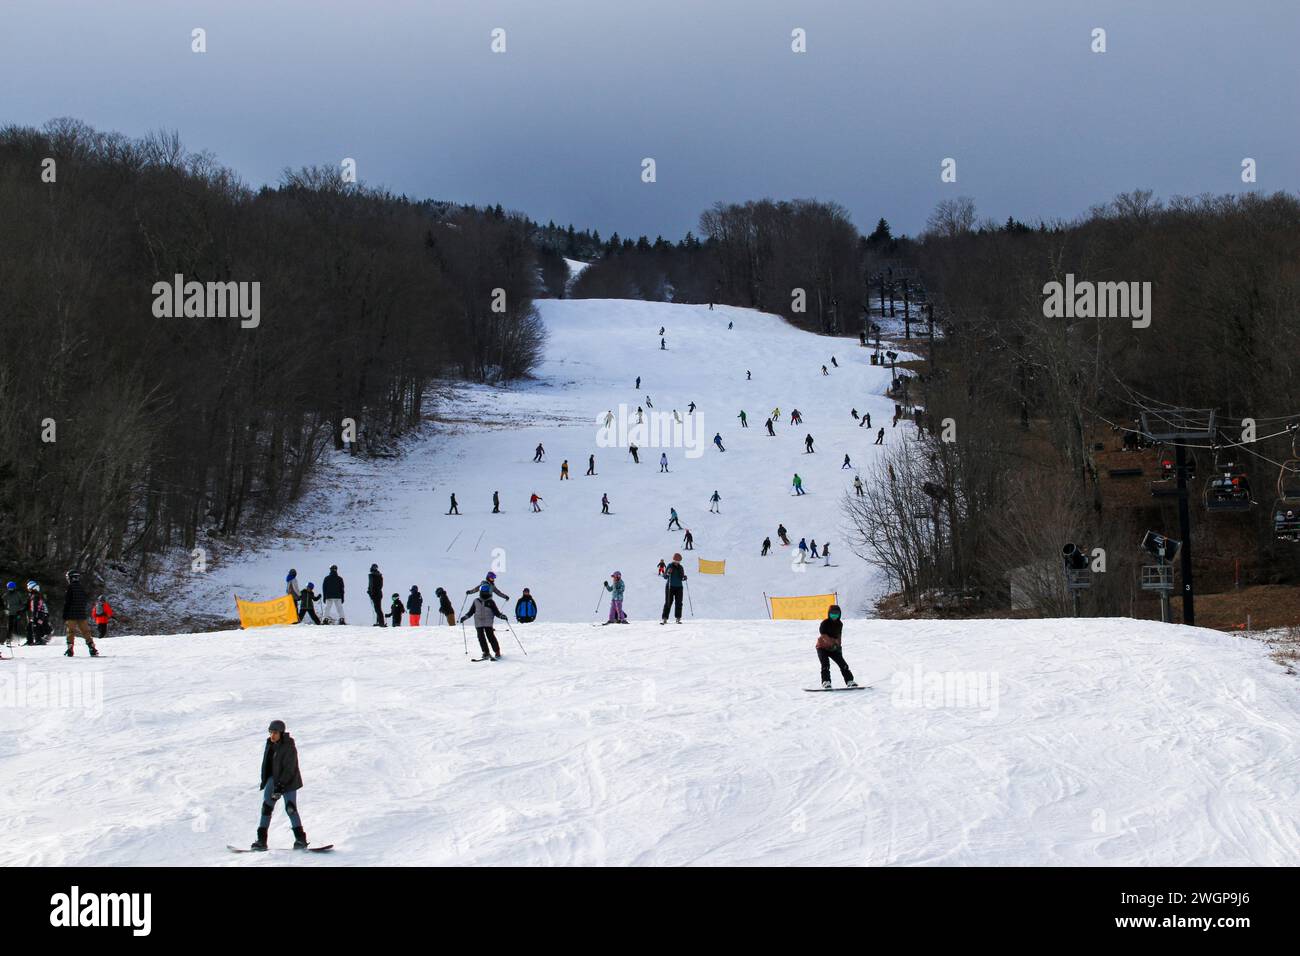 West Dover, Vermont, USA - 31 January 2023: Many skiers and snowboarders enjoying New Years Eve day on the slopes of Mt. Snow in Vermont USA. Stock Photo